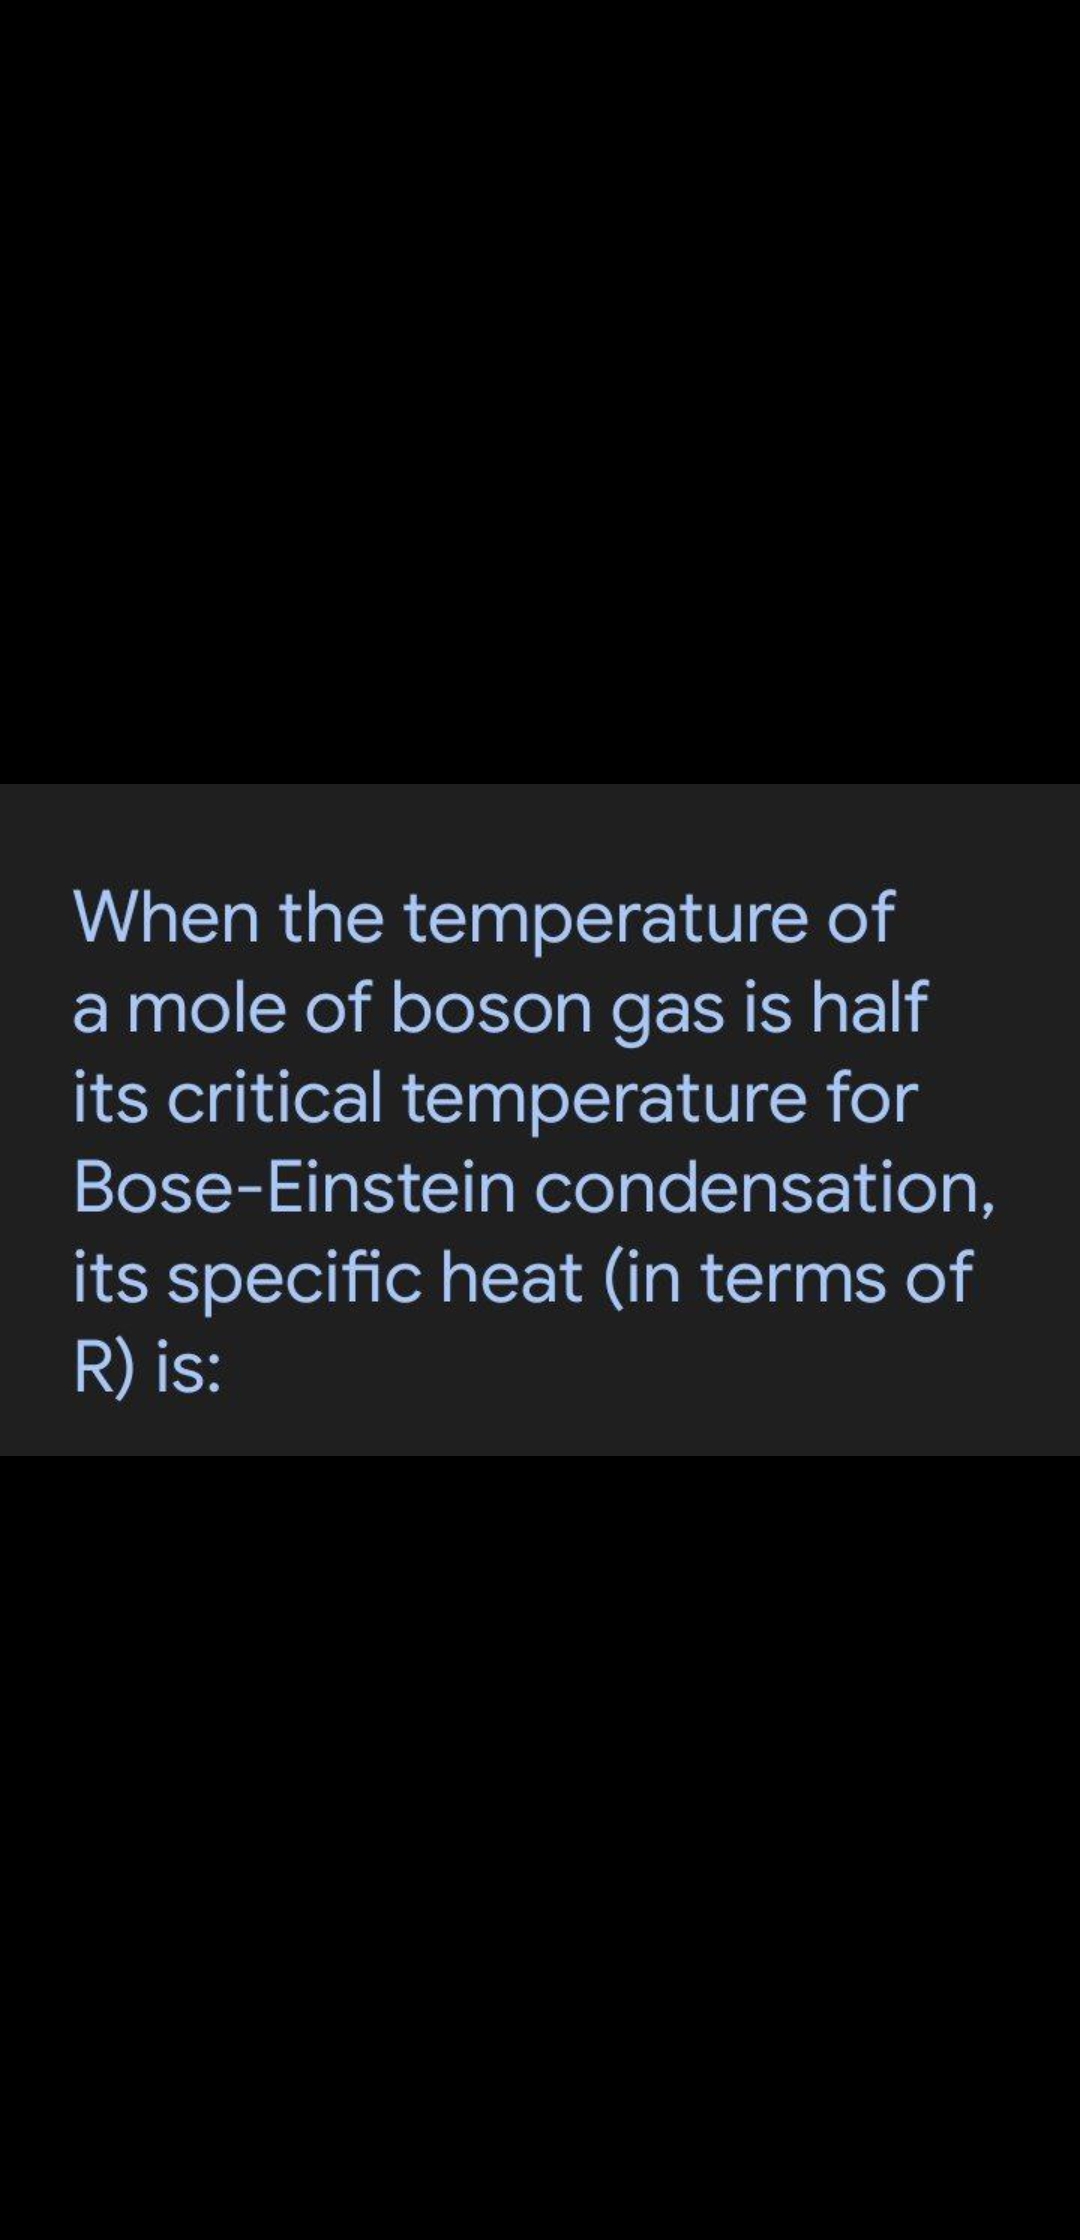 When the temperature of
a mole of boson gas is half
its critical temperature for
Bose-Einstein condensation,
its specific heat (in terms of
R) is:
